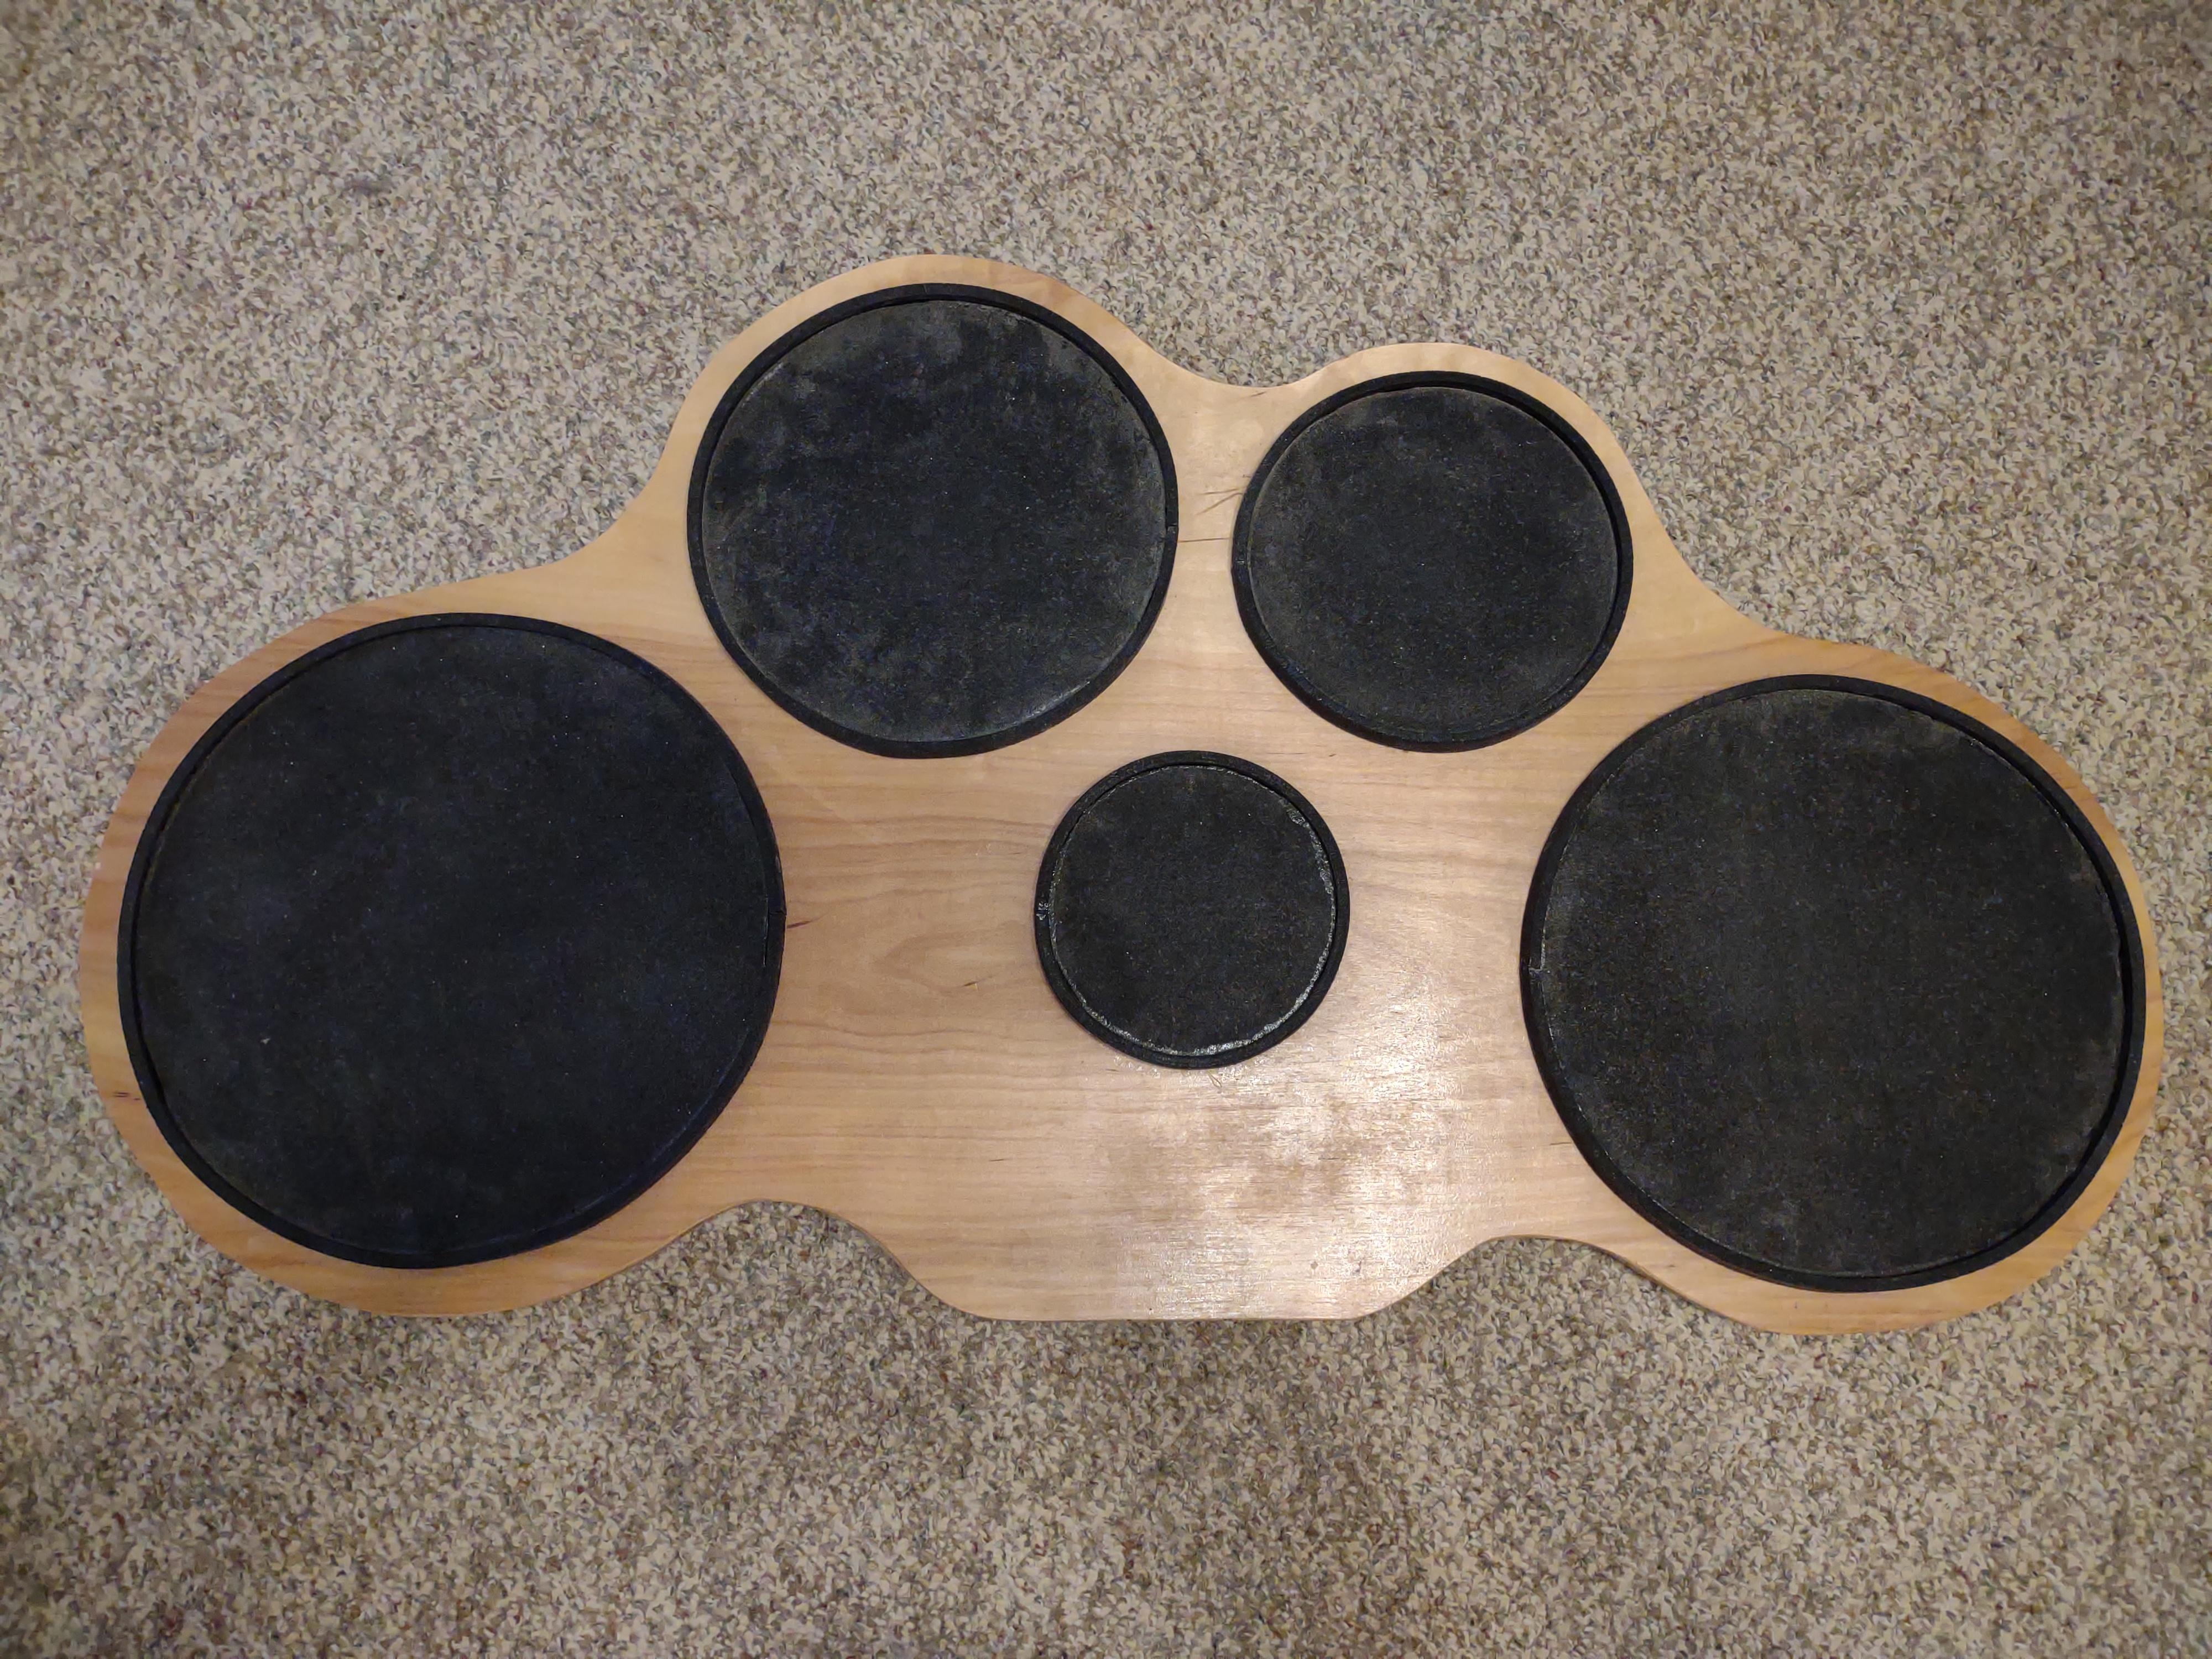 Homemade Marching Band Quints "Practice Pad" 